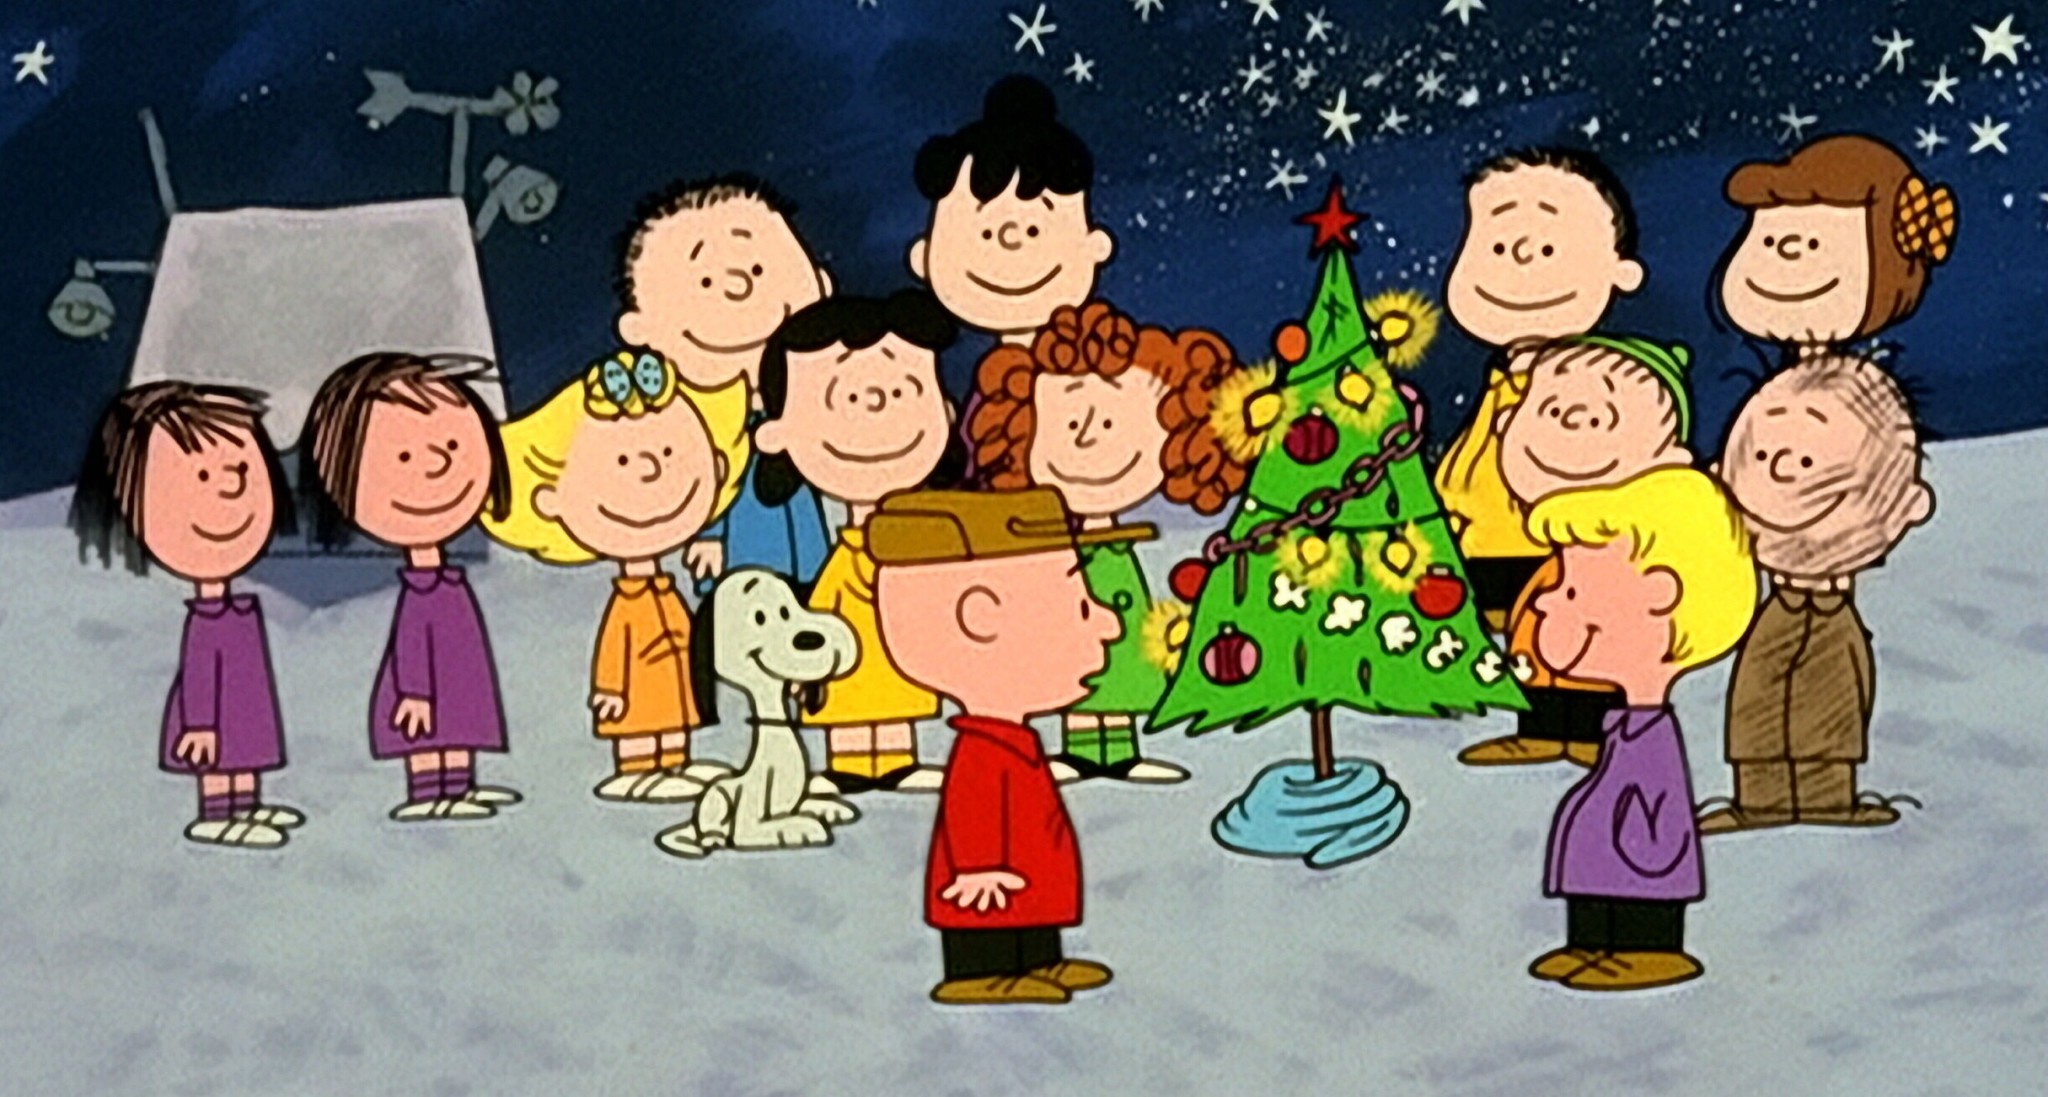 Apple TV+ Will Stream Charlie Brown For Free to Non-Members This Holiday Season